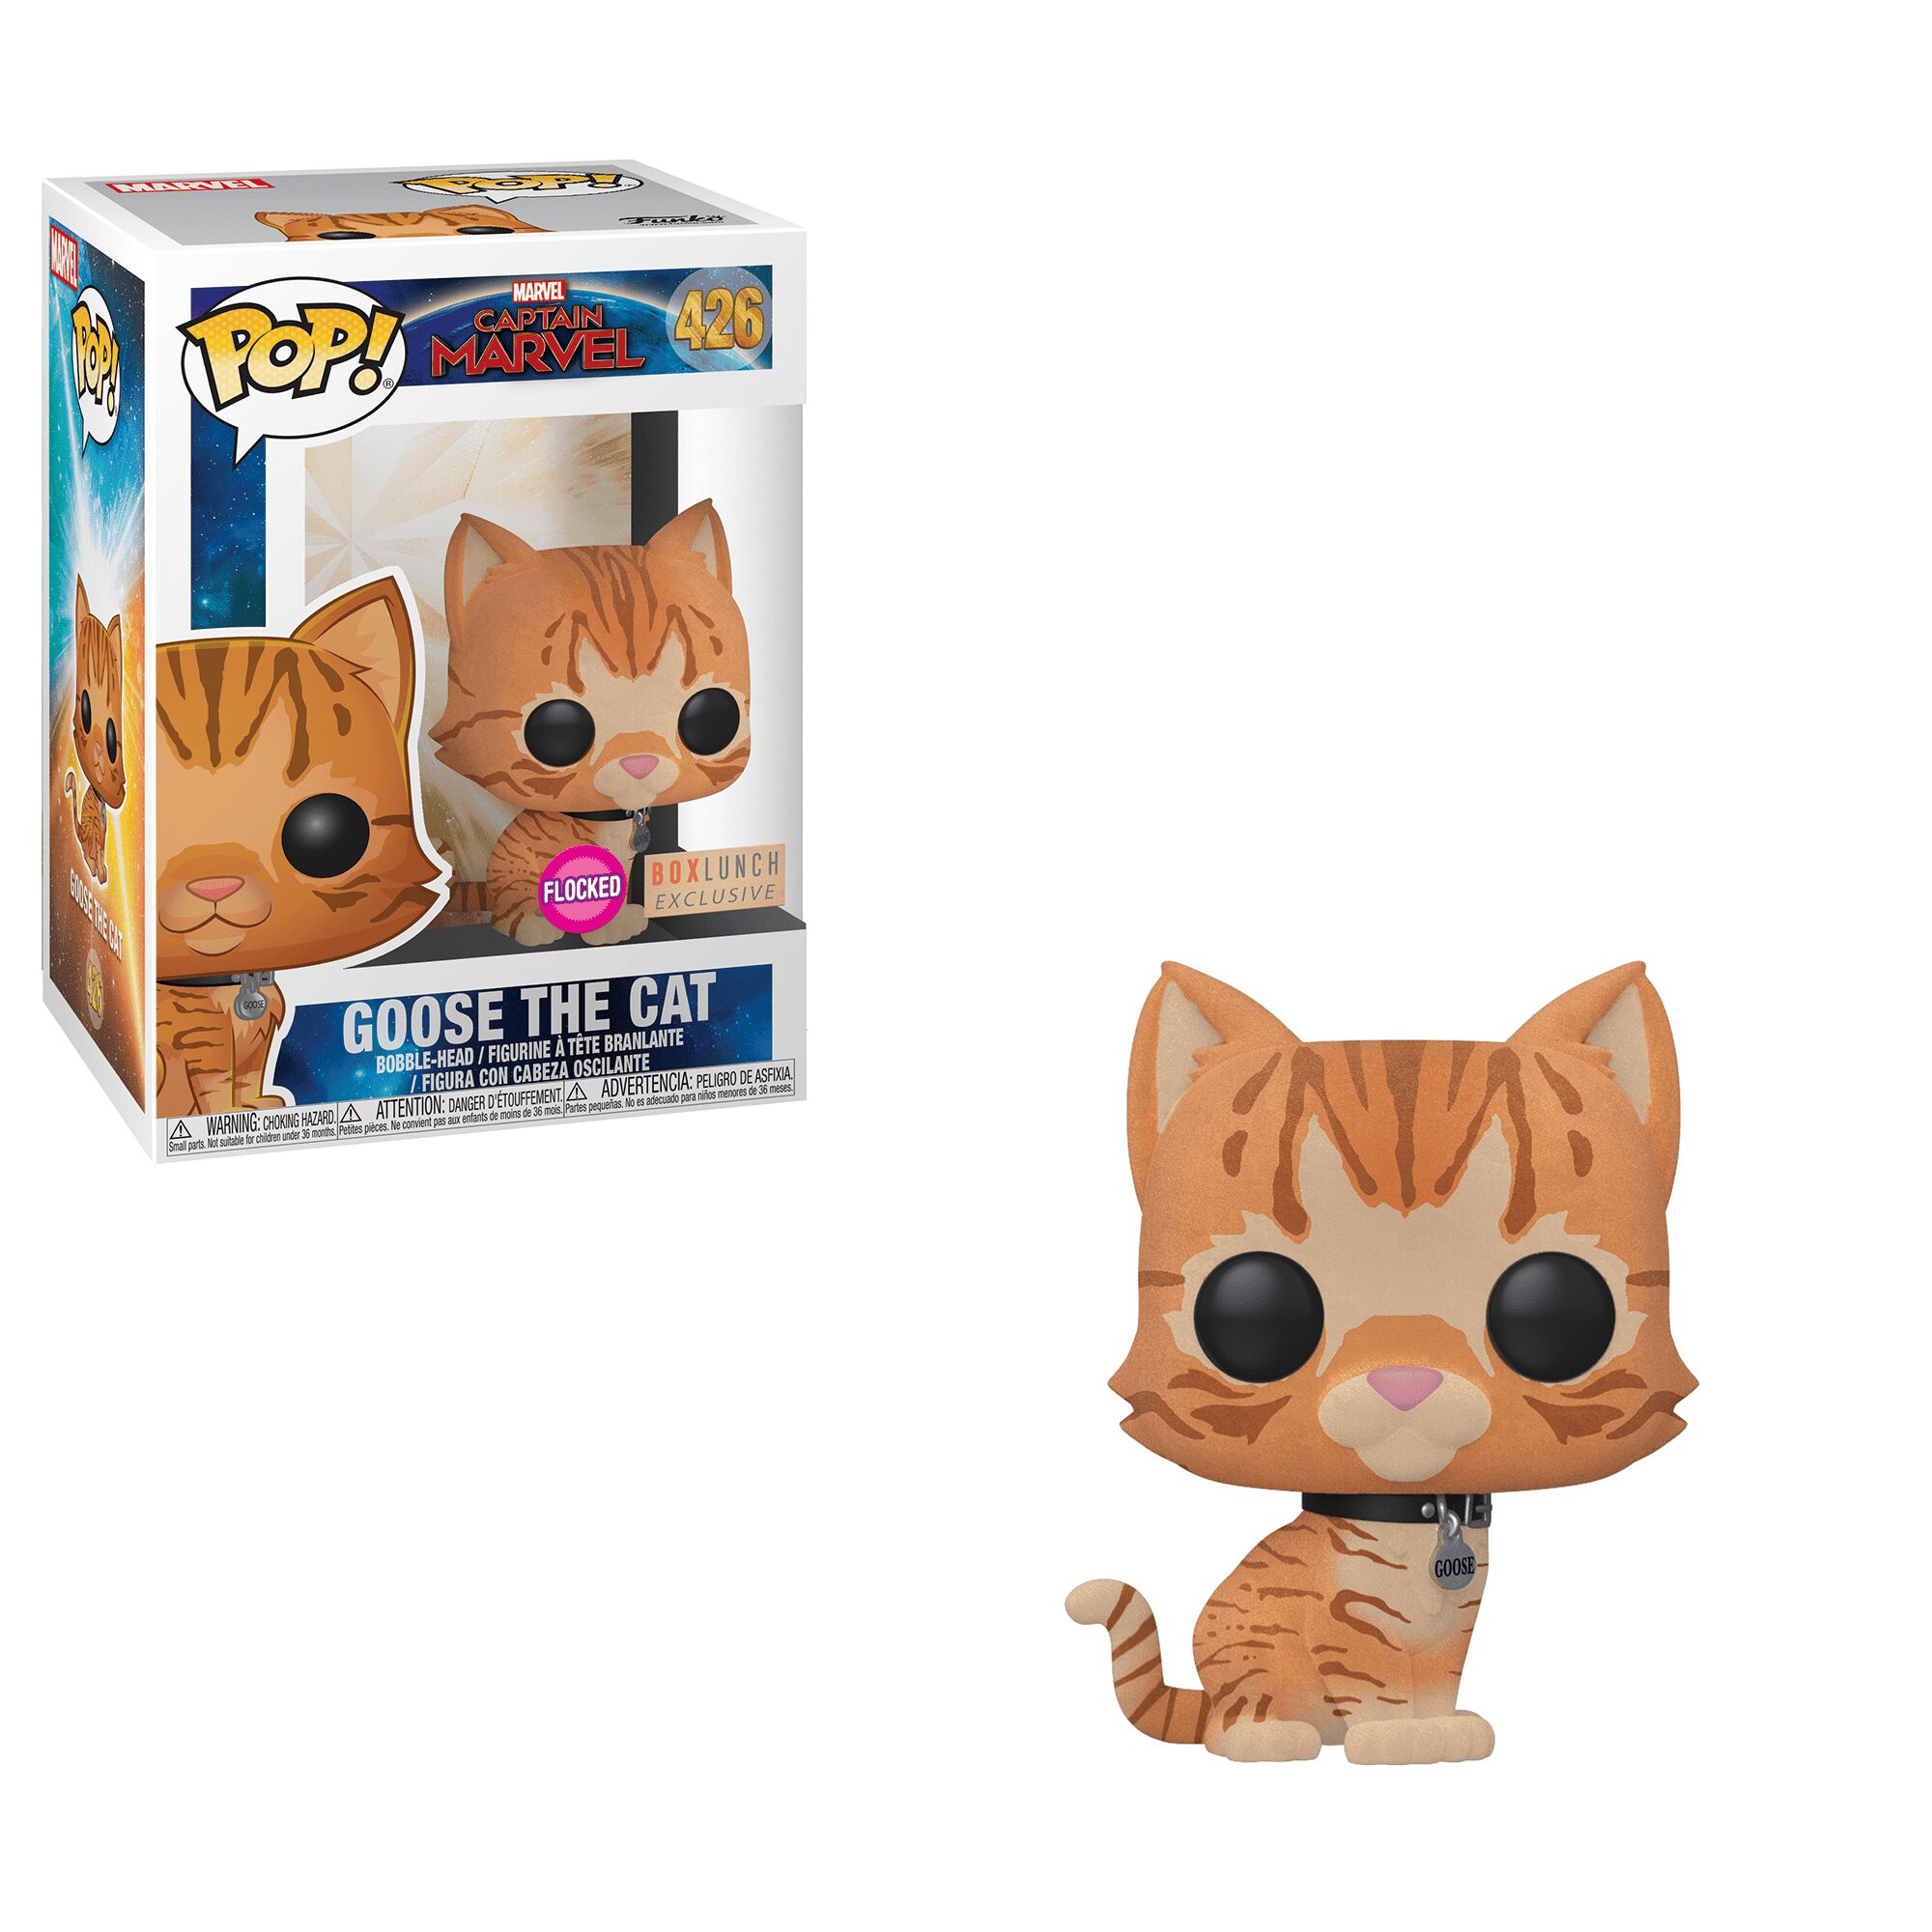 COMING SOON TO BOXLUNCH: Captain Marvel Flocked Goose the Cat Pop!